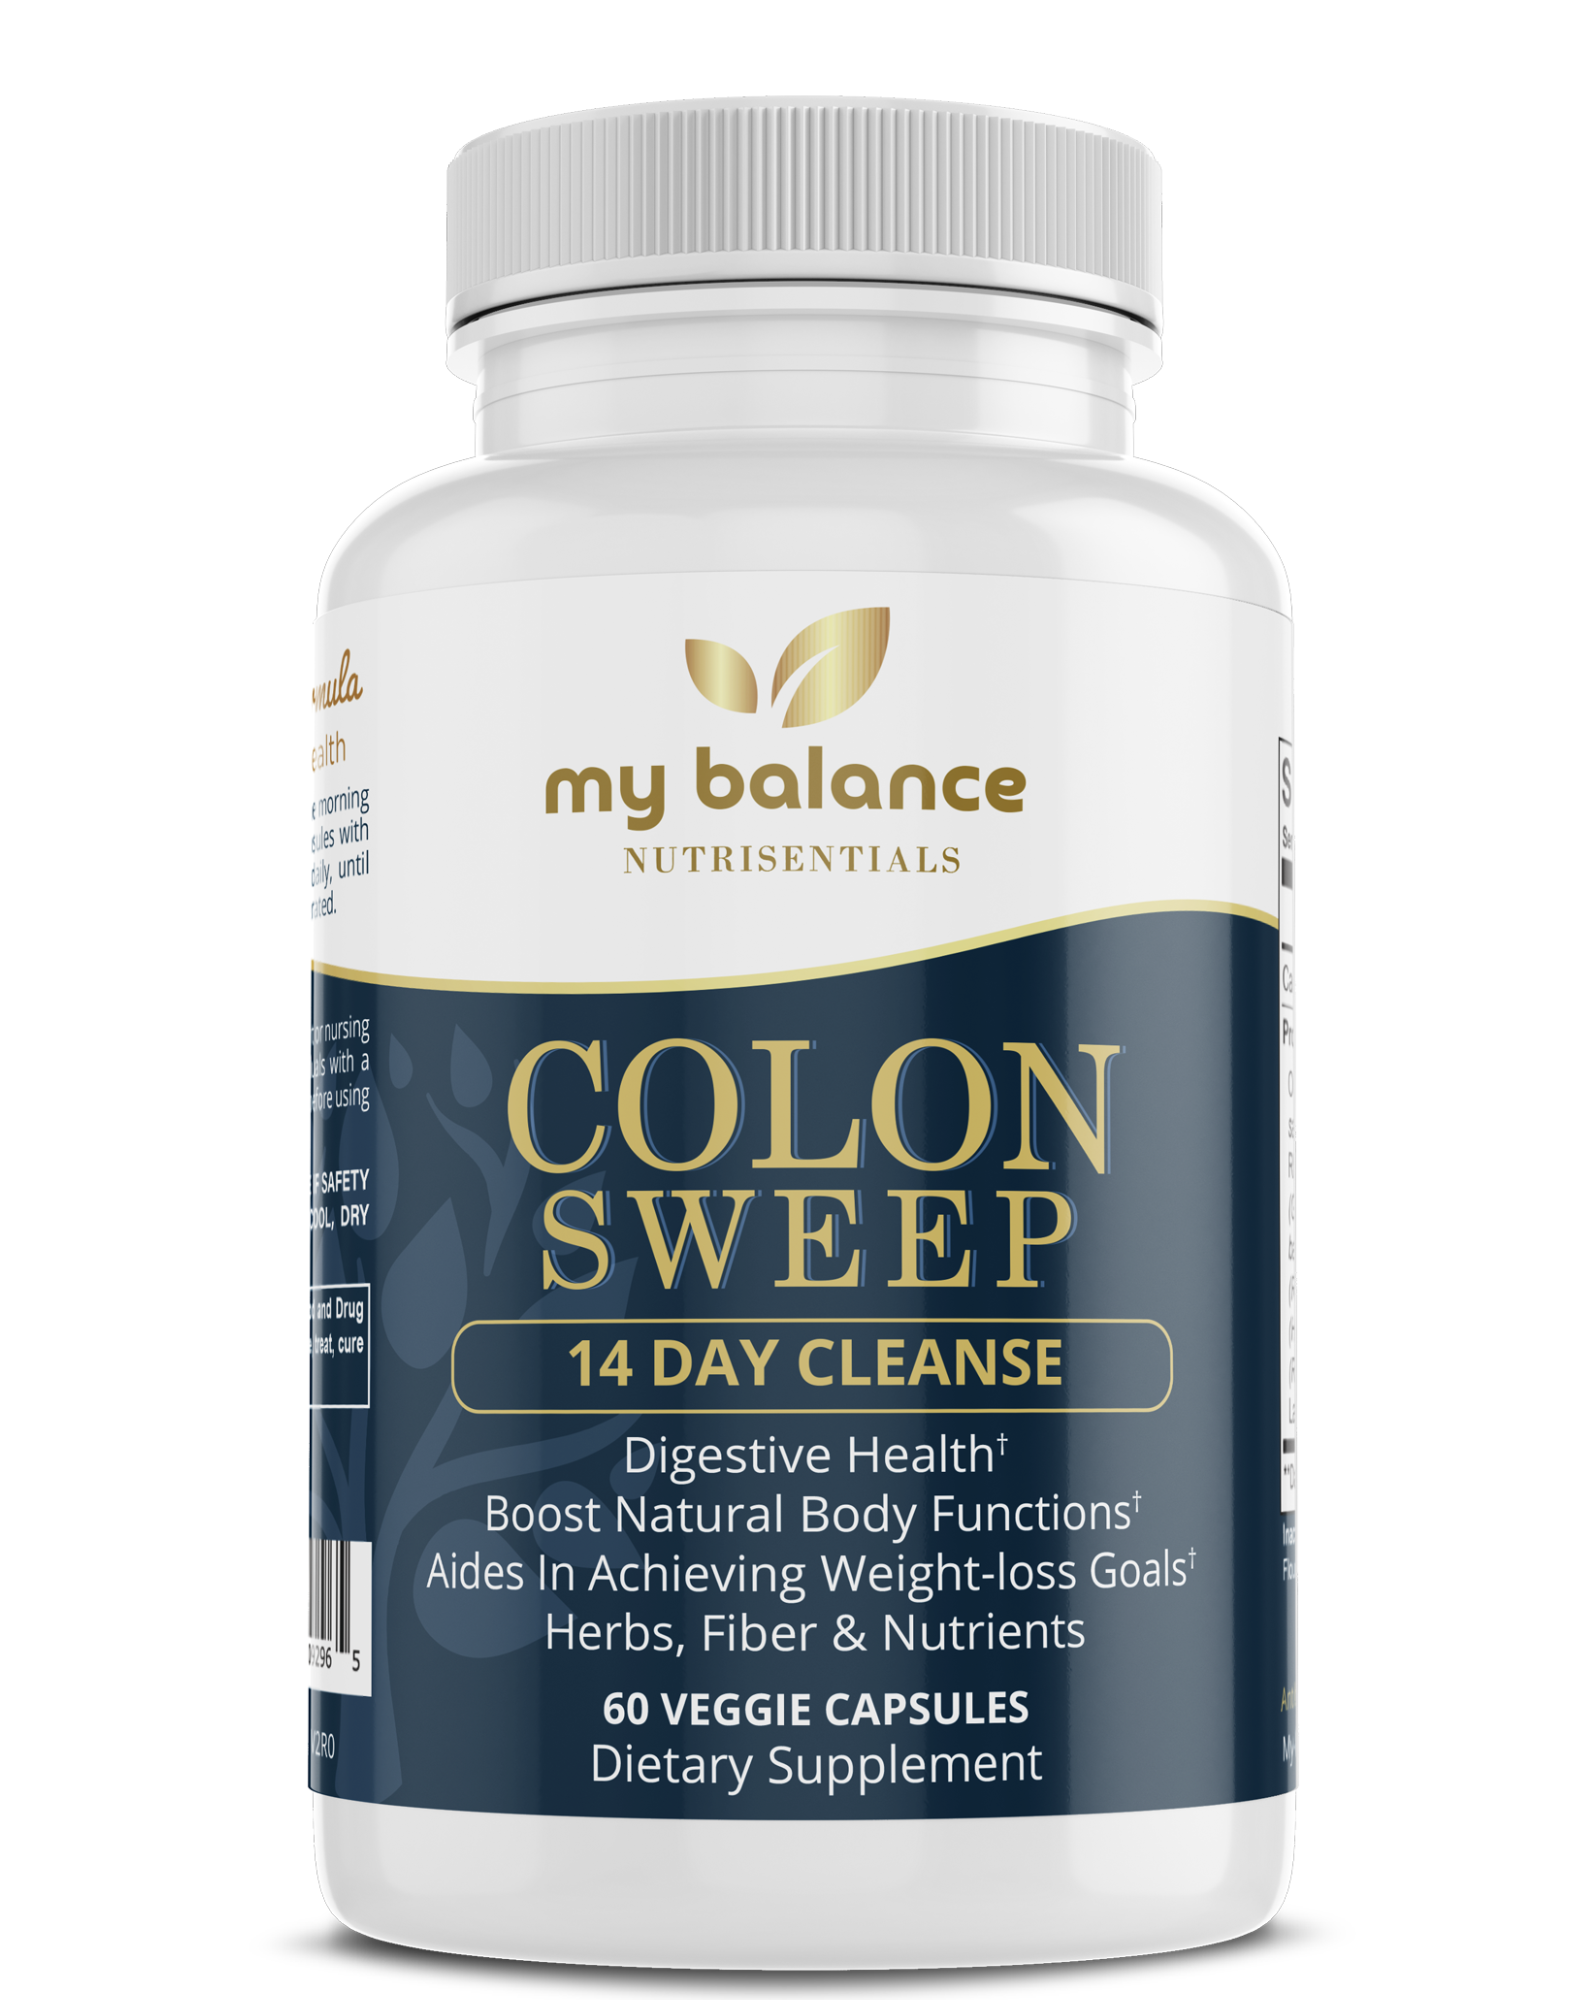 I took the most POWERFUL Colon Stomach Cleanse in Jamaica